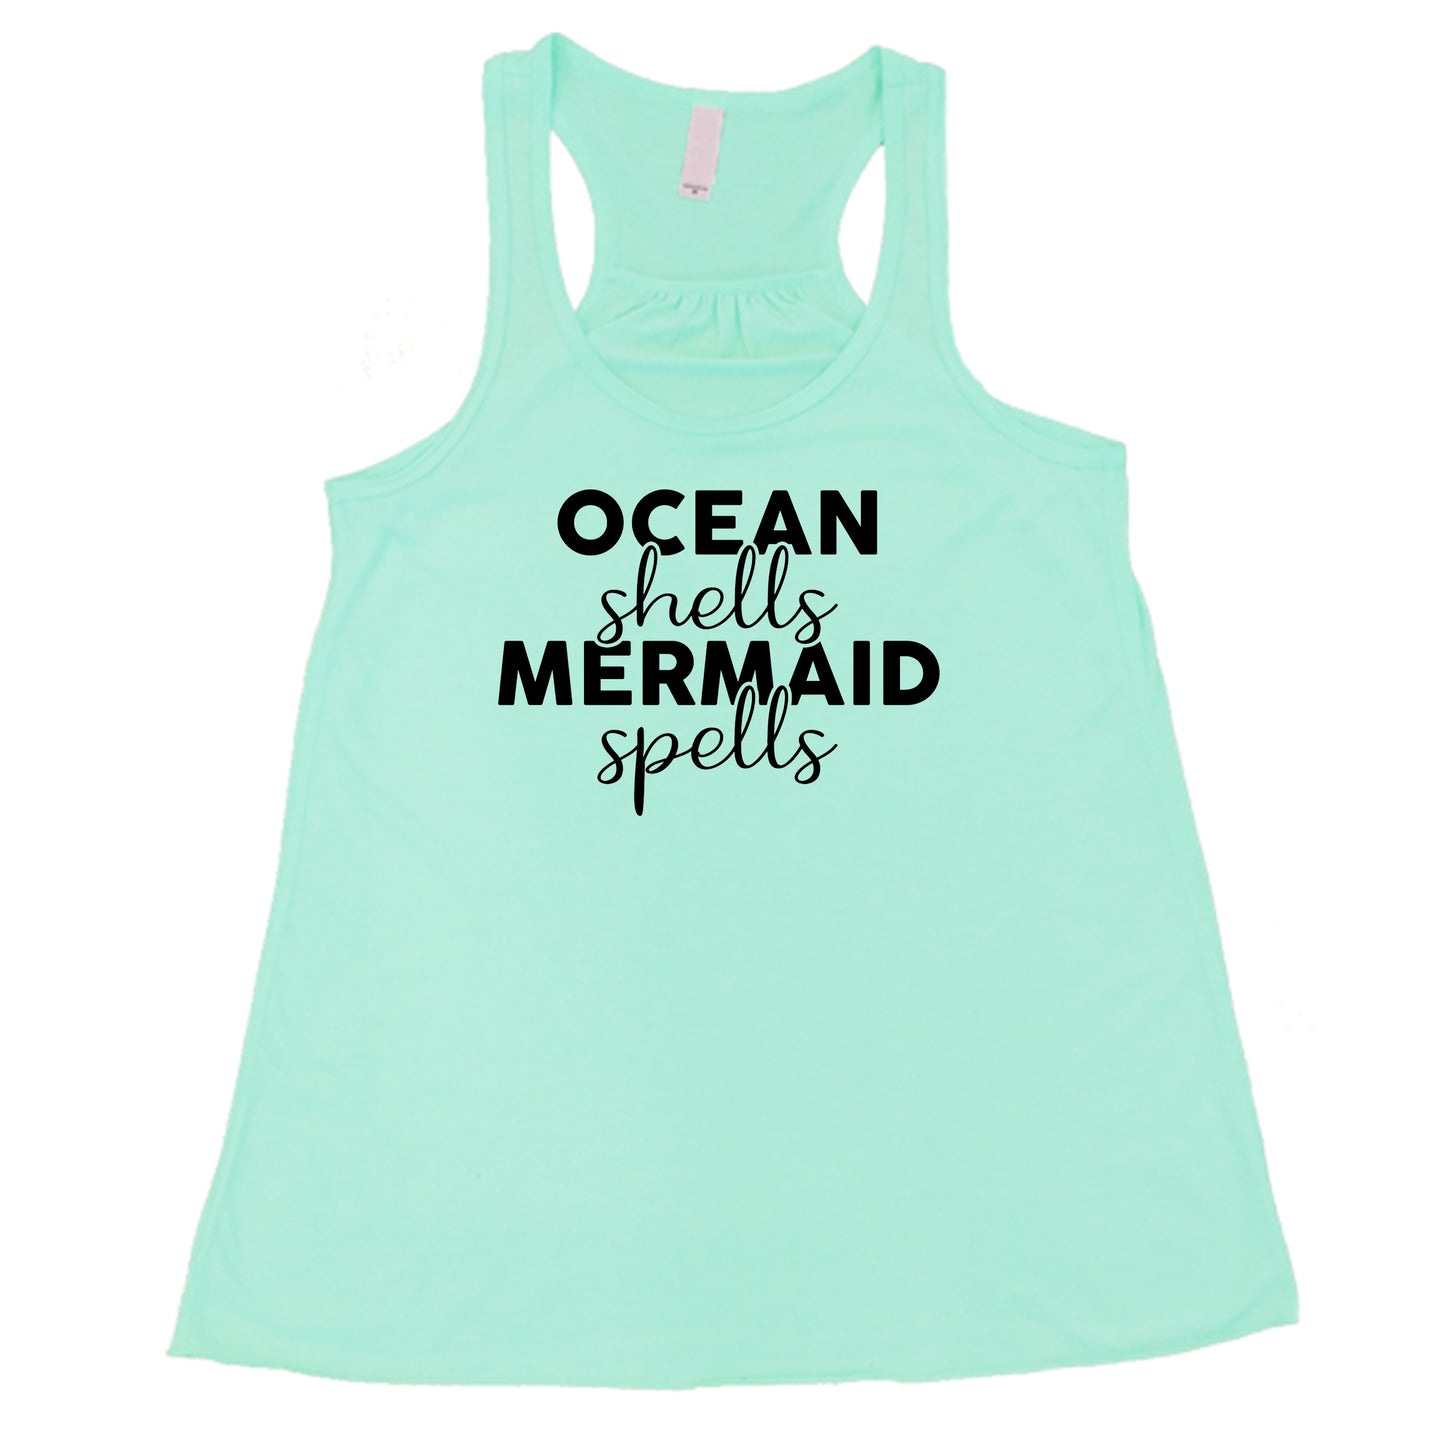 mint racerback tank with the saying "ocean shells mermaid spells" in black in the center